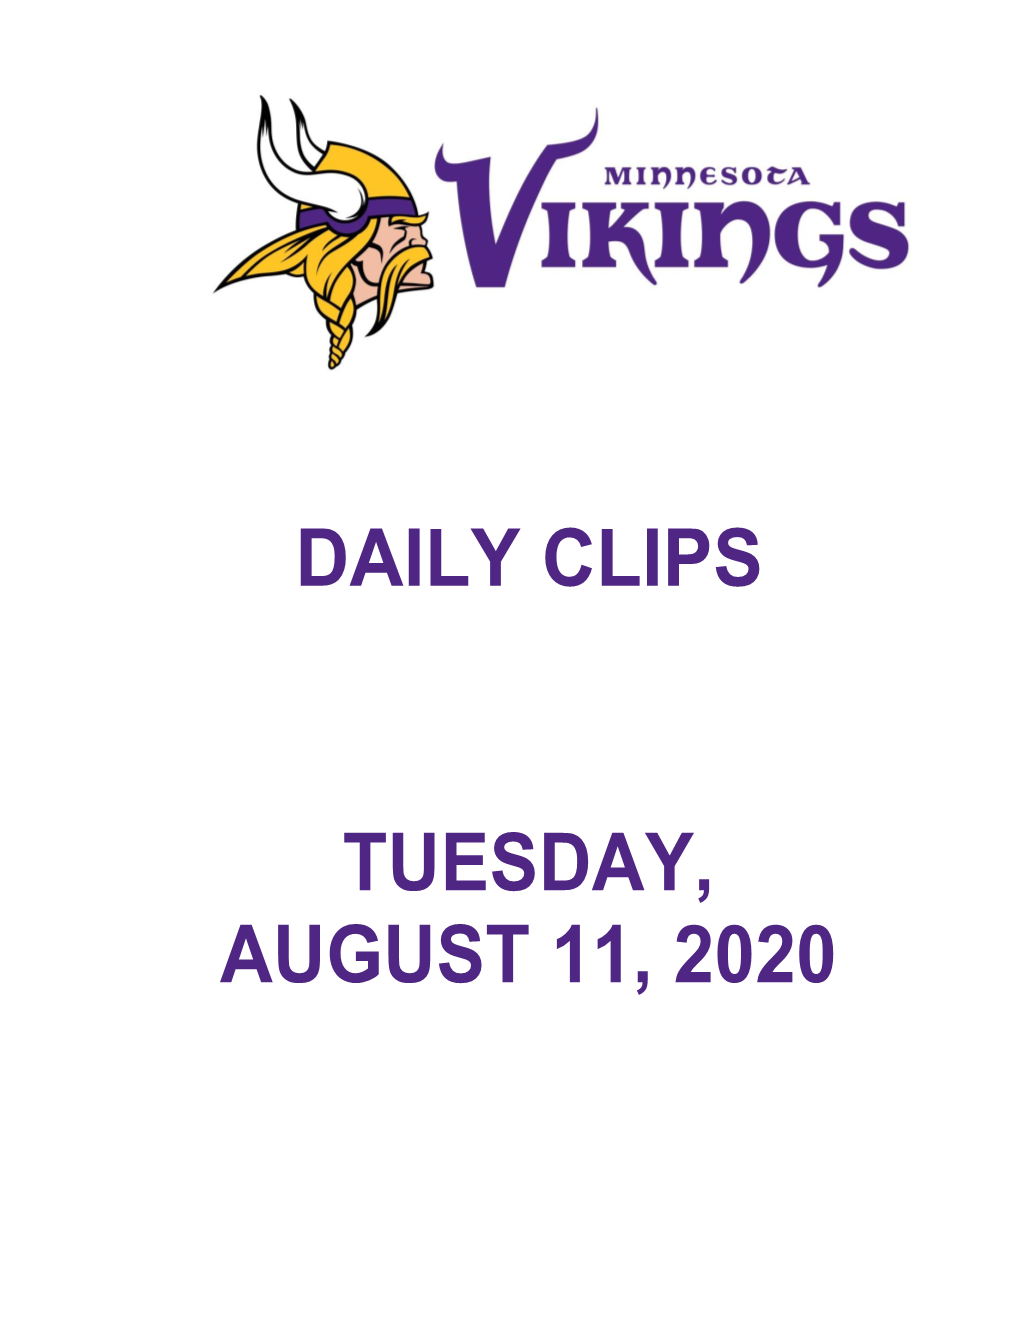 Daily Clips Tuesday, August 11, 2020